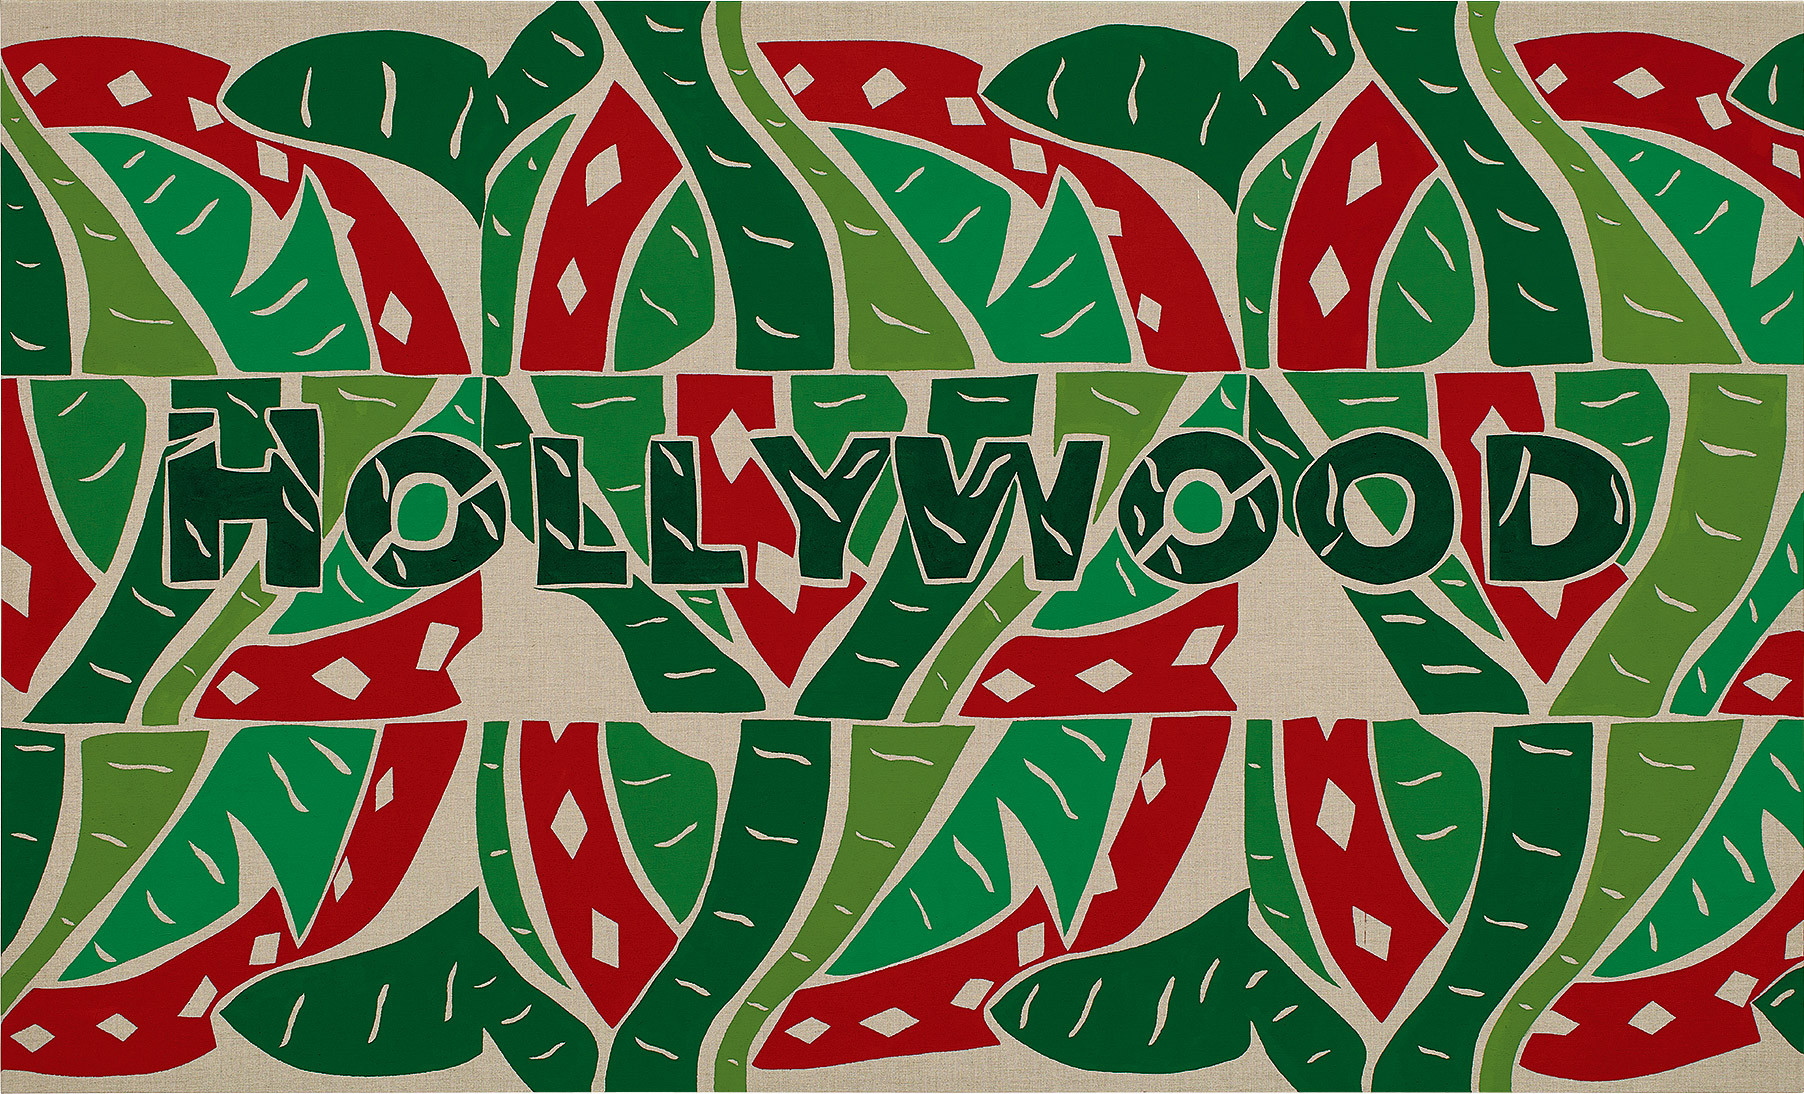 Untitled (Tony Chang Goes to Hollywood)